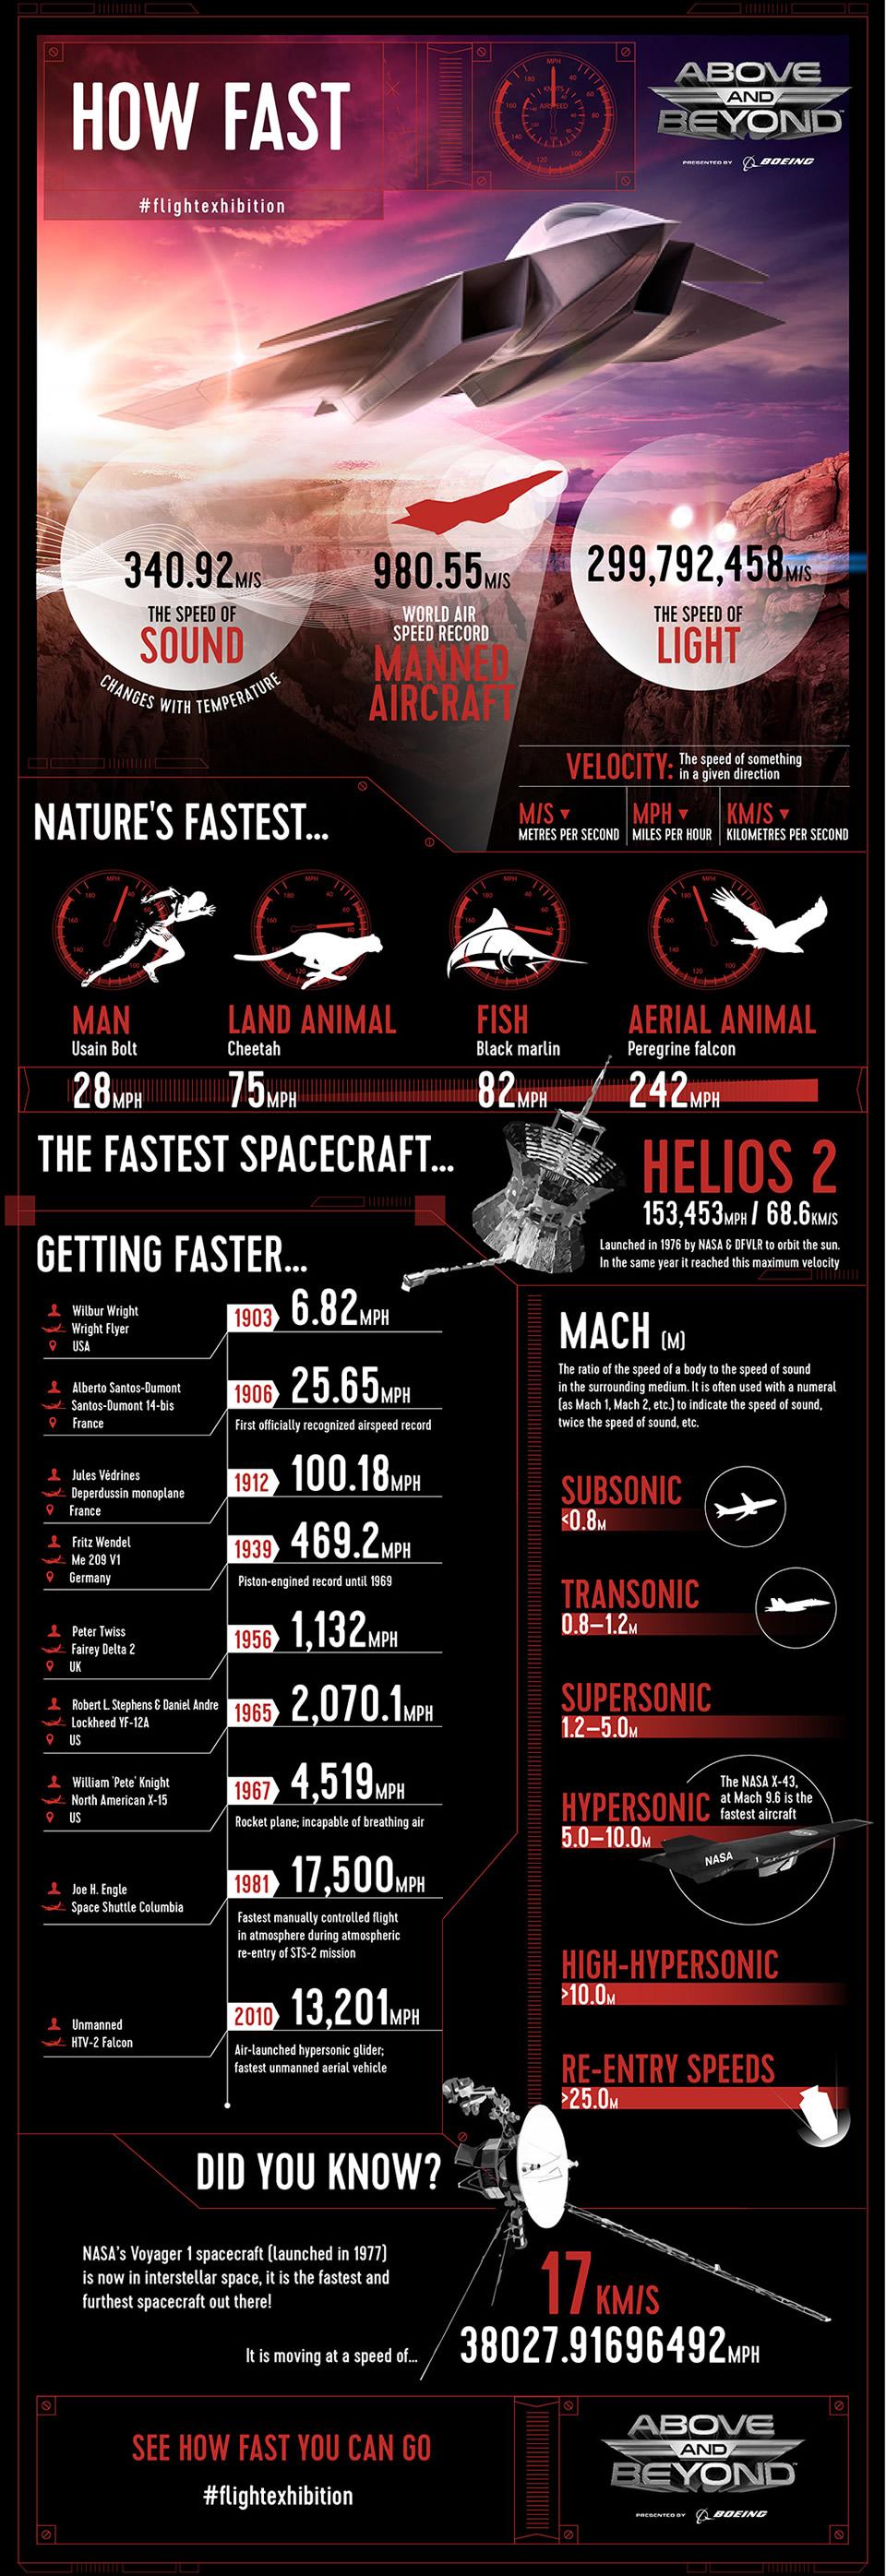 Above and Beyond: How Fast infographic